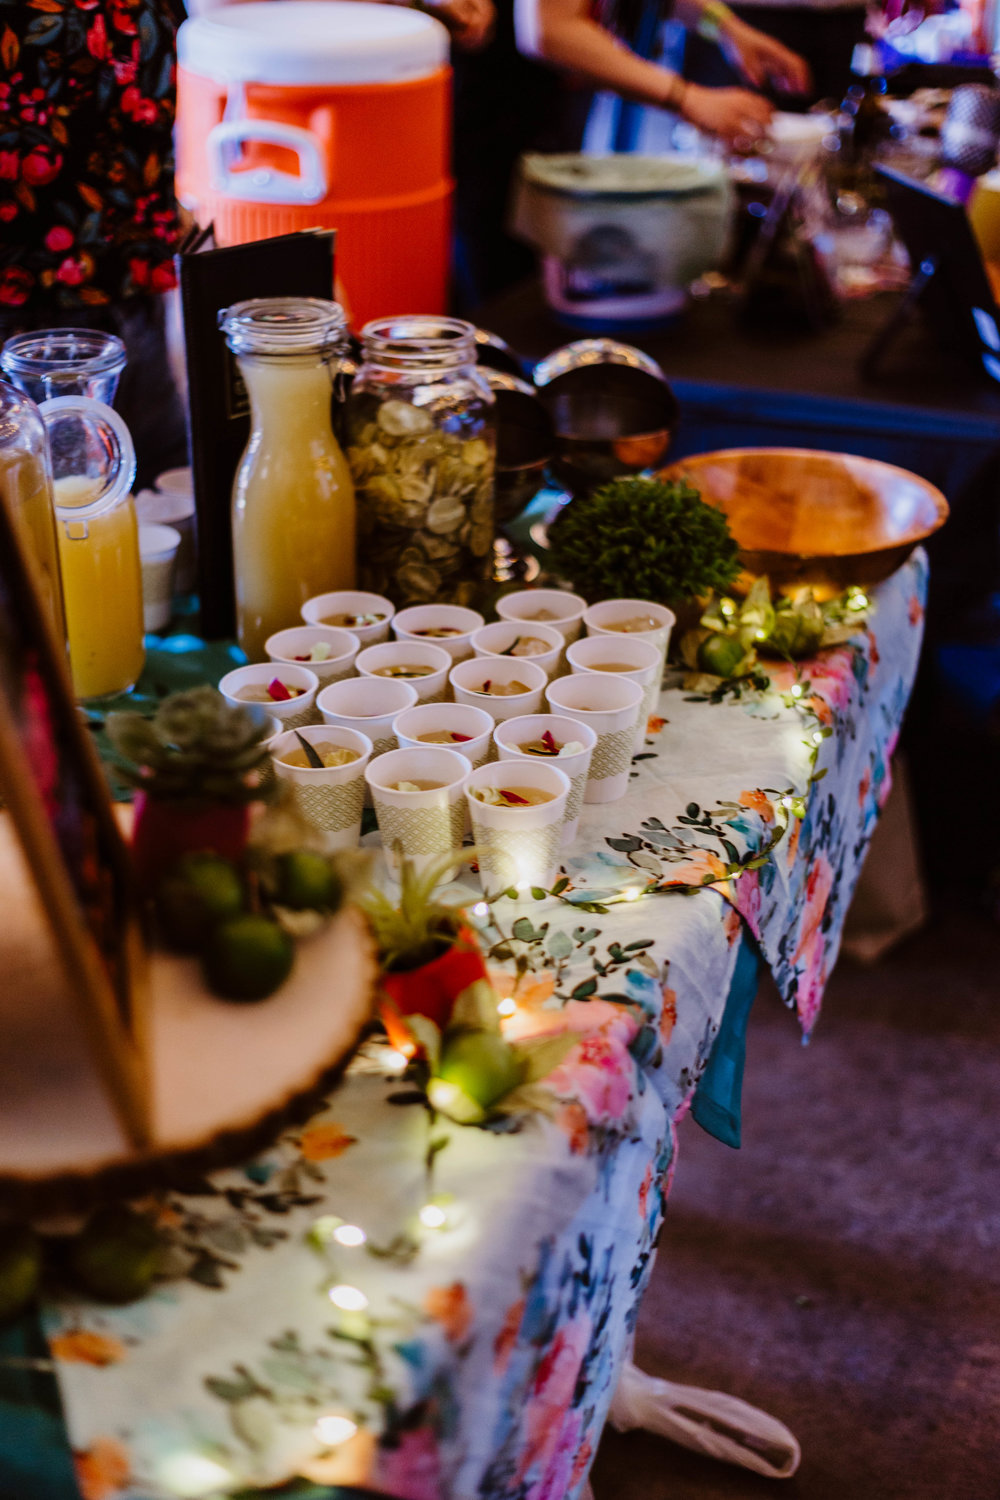  Some of the many displays of hand-crafted margaritas at the event.  